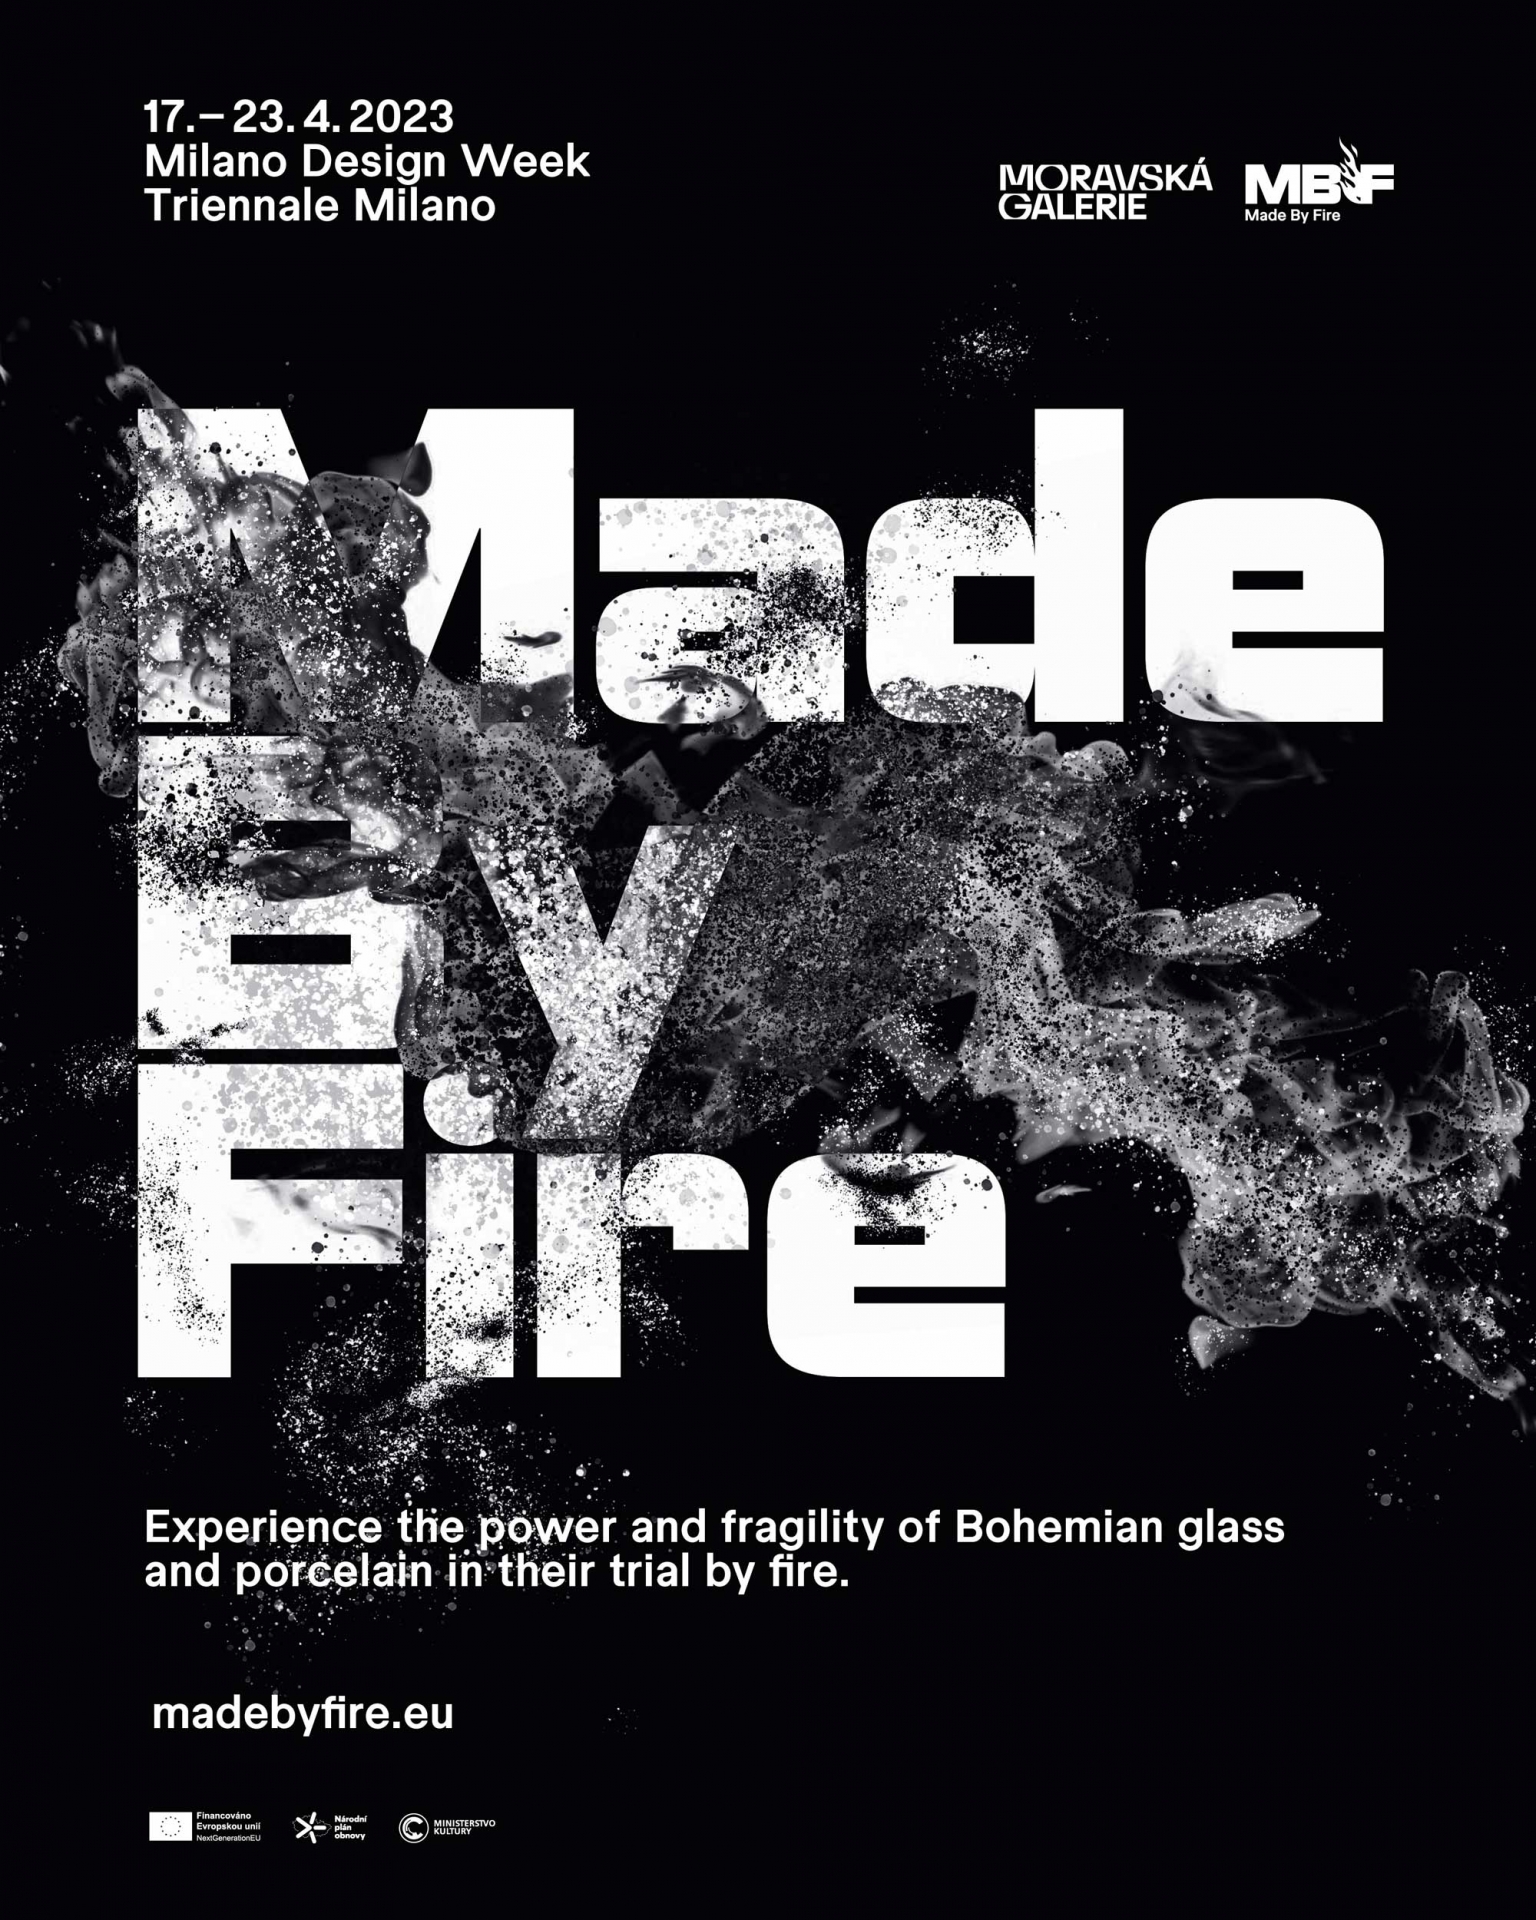 The Moravian Gallery and Designblok send the best Czech designers of glass, porcelain and ceramics to Milan. They will be presented in the unique Made by Fire exhibition at the Triennale Milano